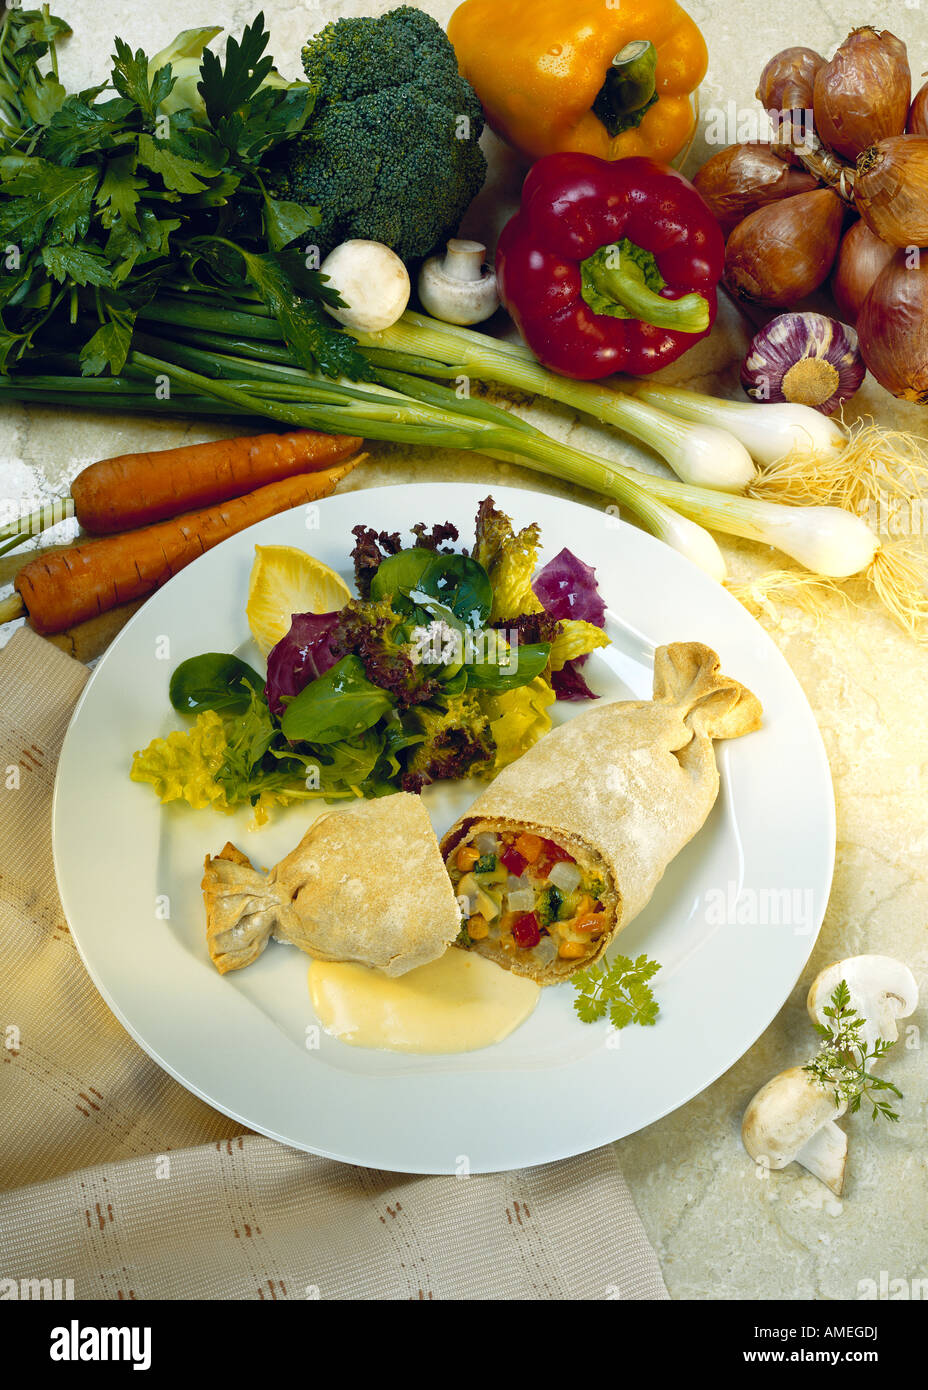 stuffed pastry with vegetable Stock Photo